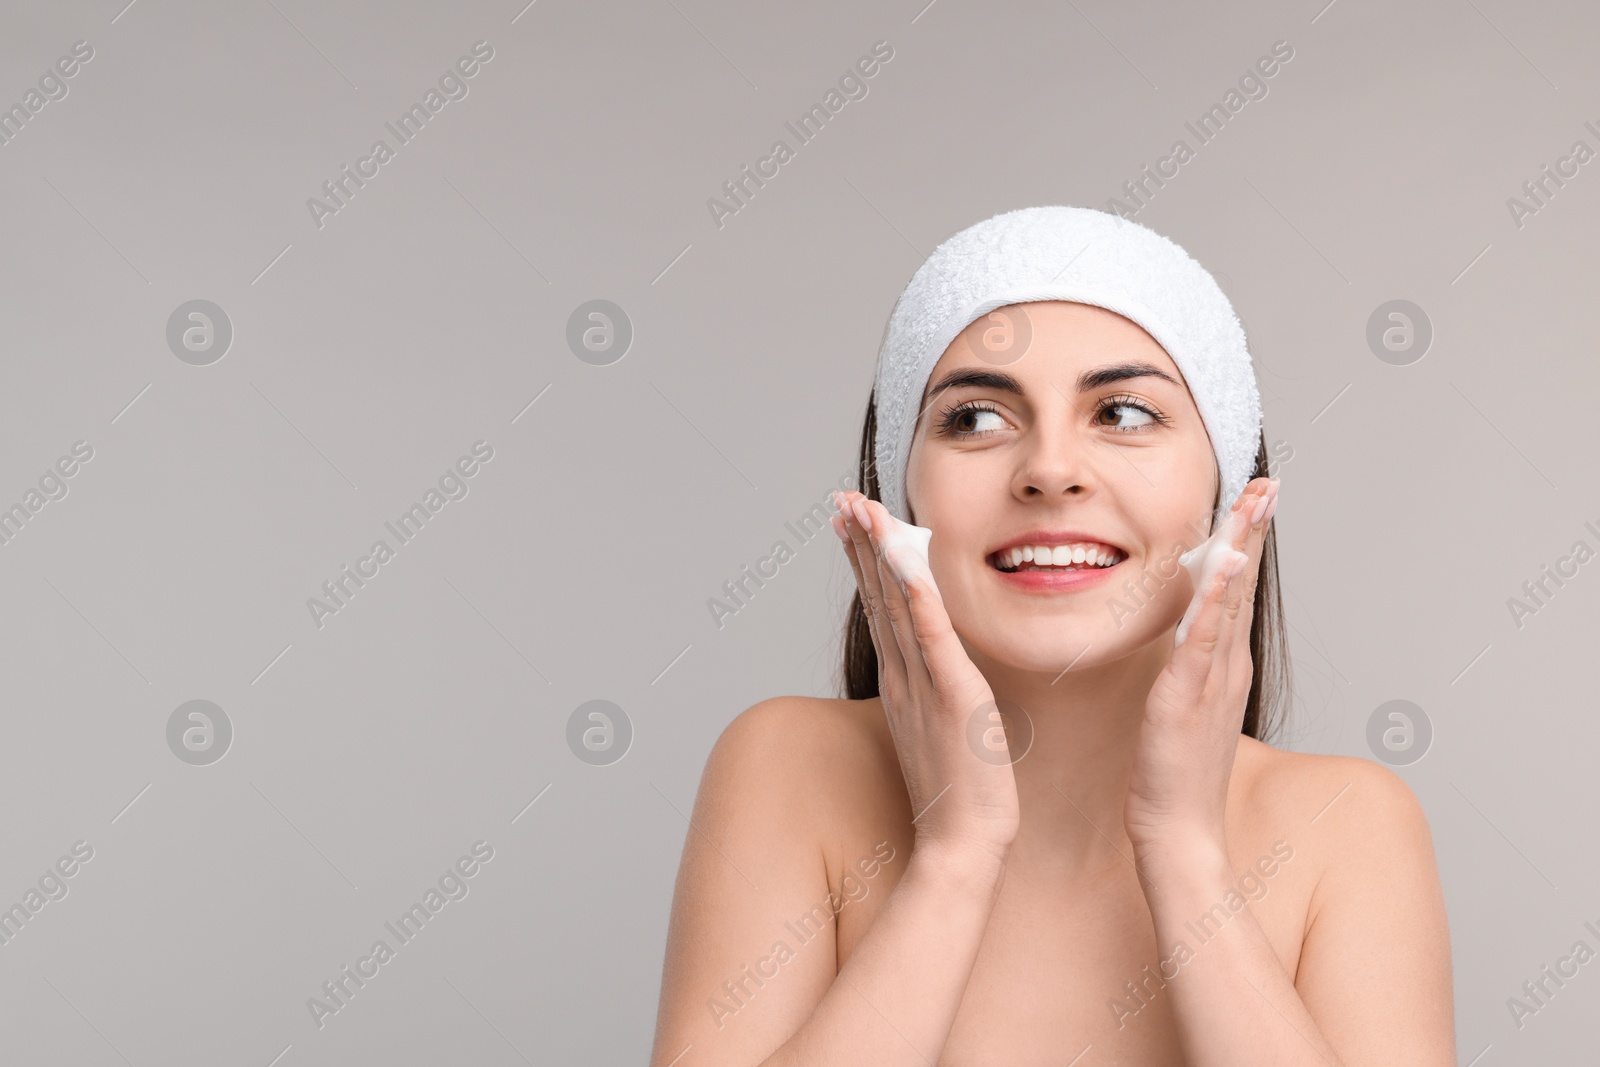 Photo of Young woman with headband washing her face on light grey background, space for text